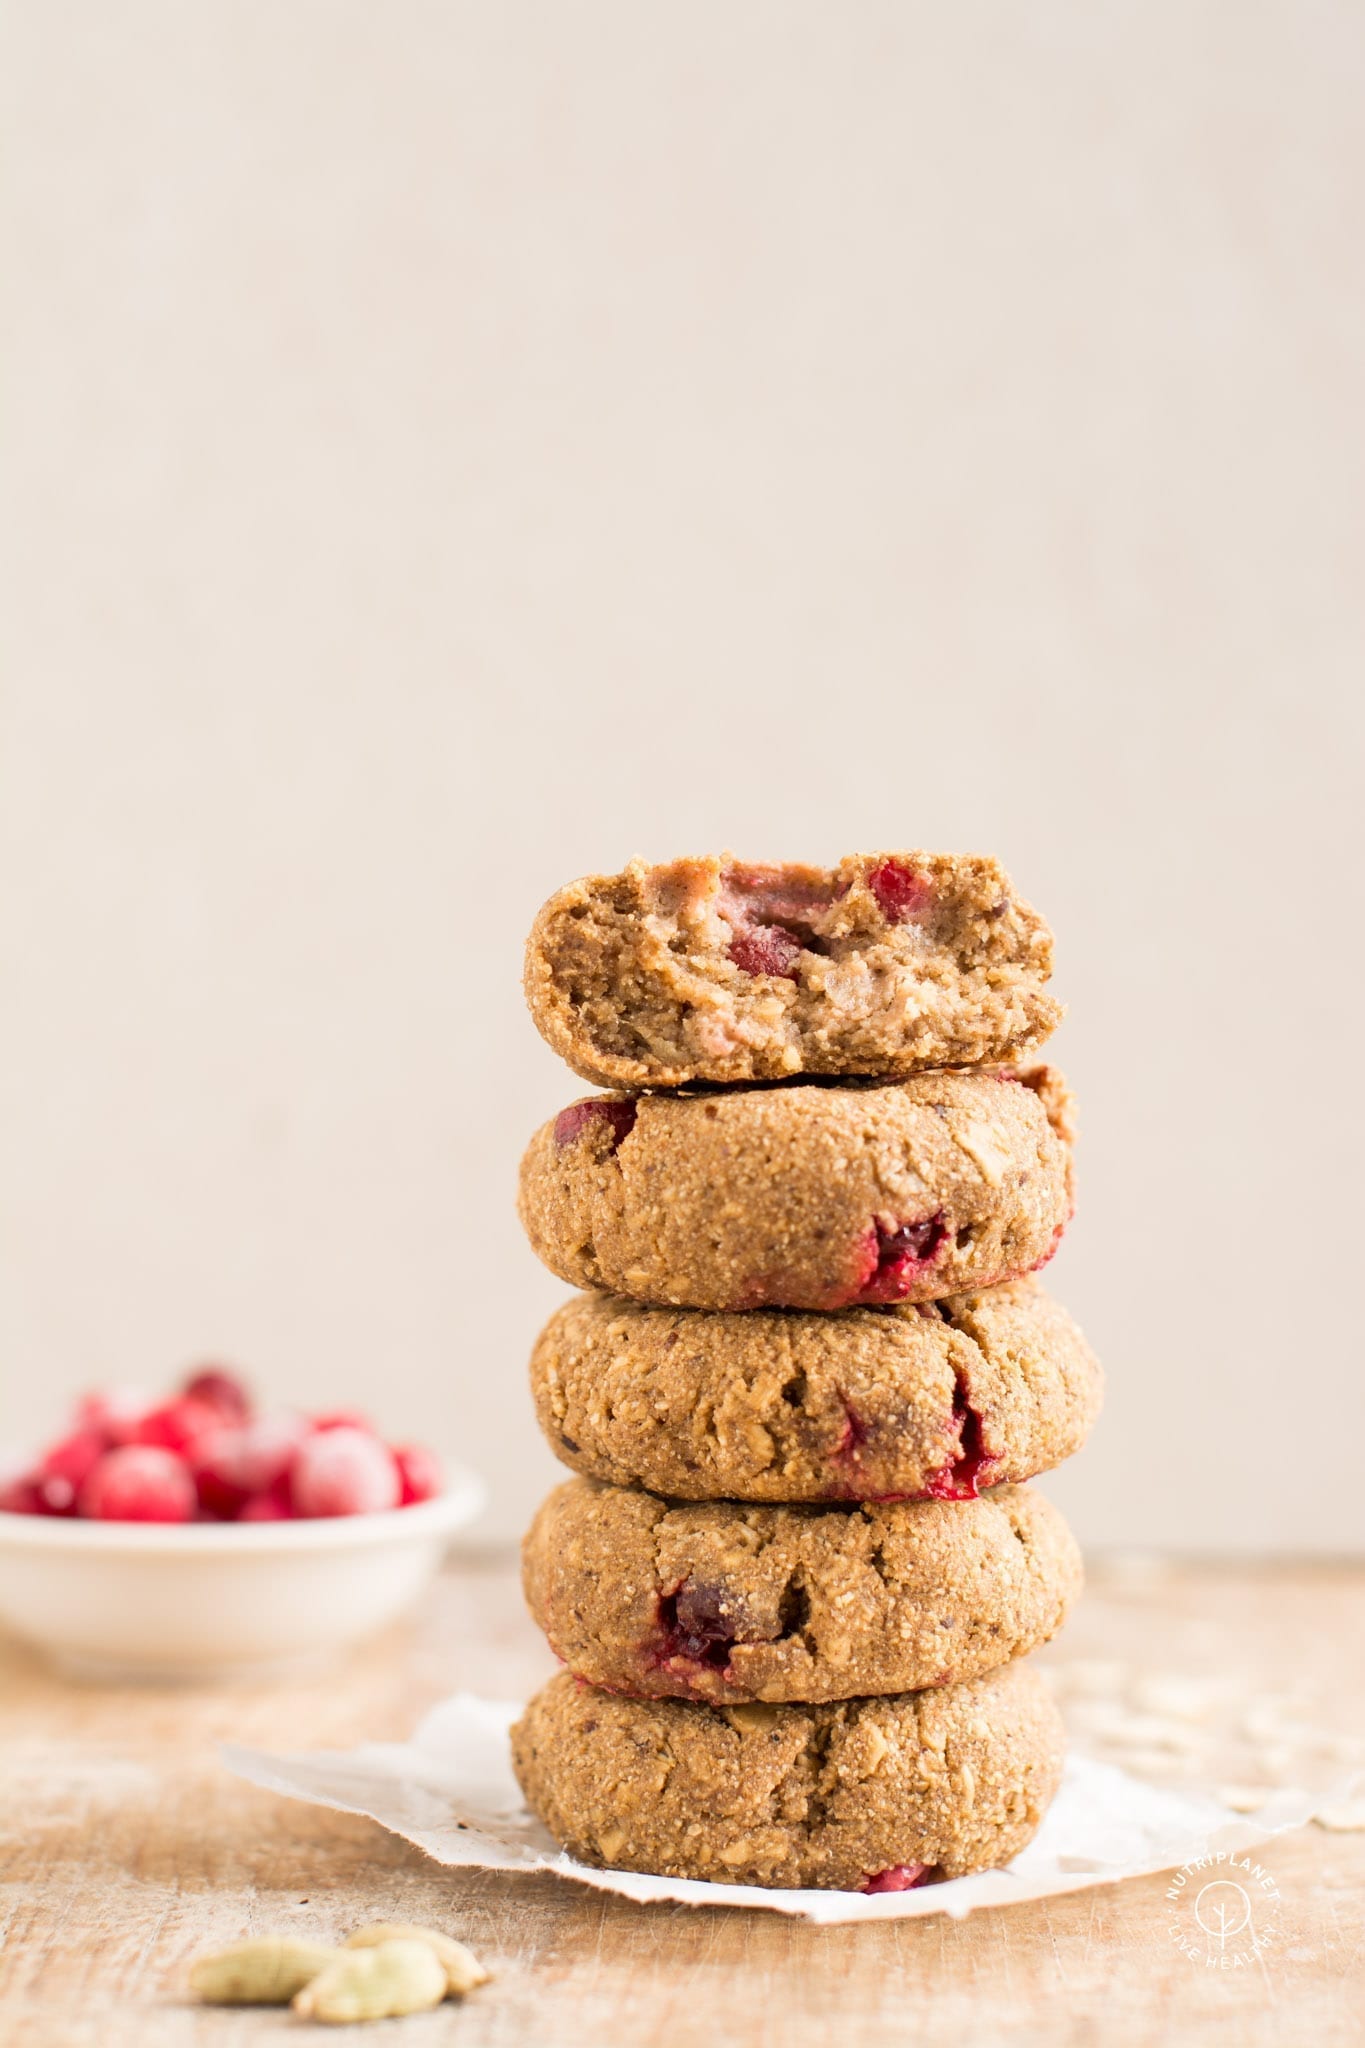 Those soft cardamom cookies with cranberries will be on spot for your afternoon cup of tea or coffee. You’ll only need 20 minutes of your time, a bowl and a blender. 